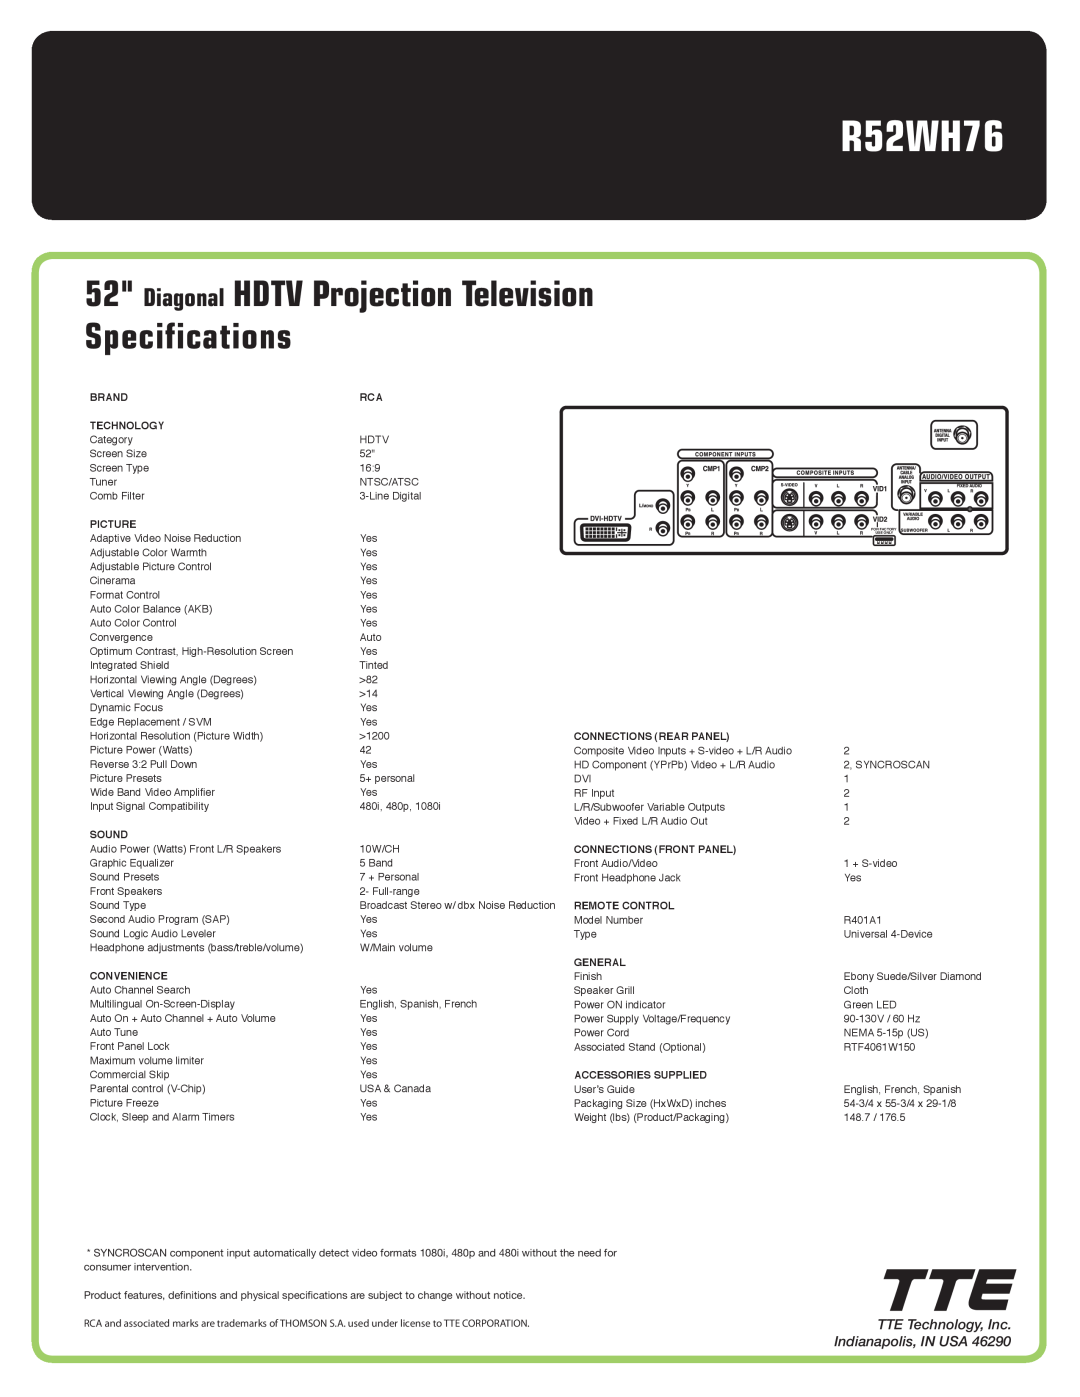 RCA R52WH76 manual Diagonal HDTV Projection Television Specifications, TTE Technology, Inc. Indianapolis, IN USA 